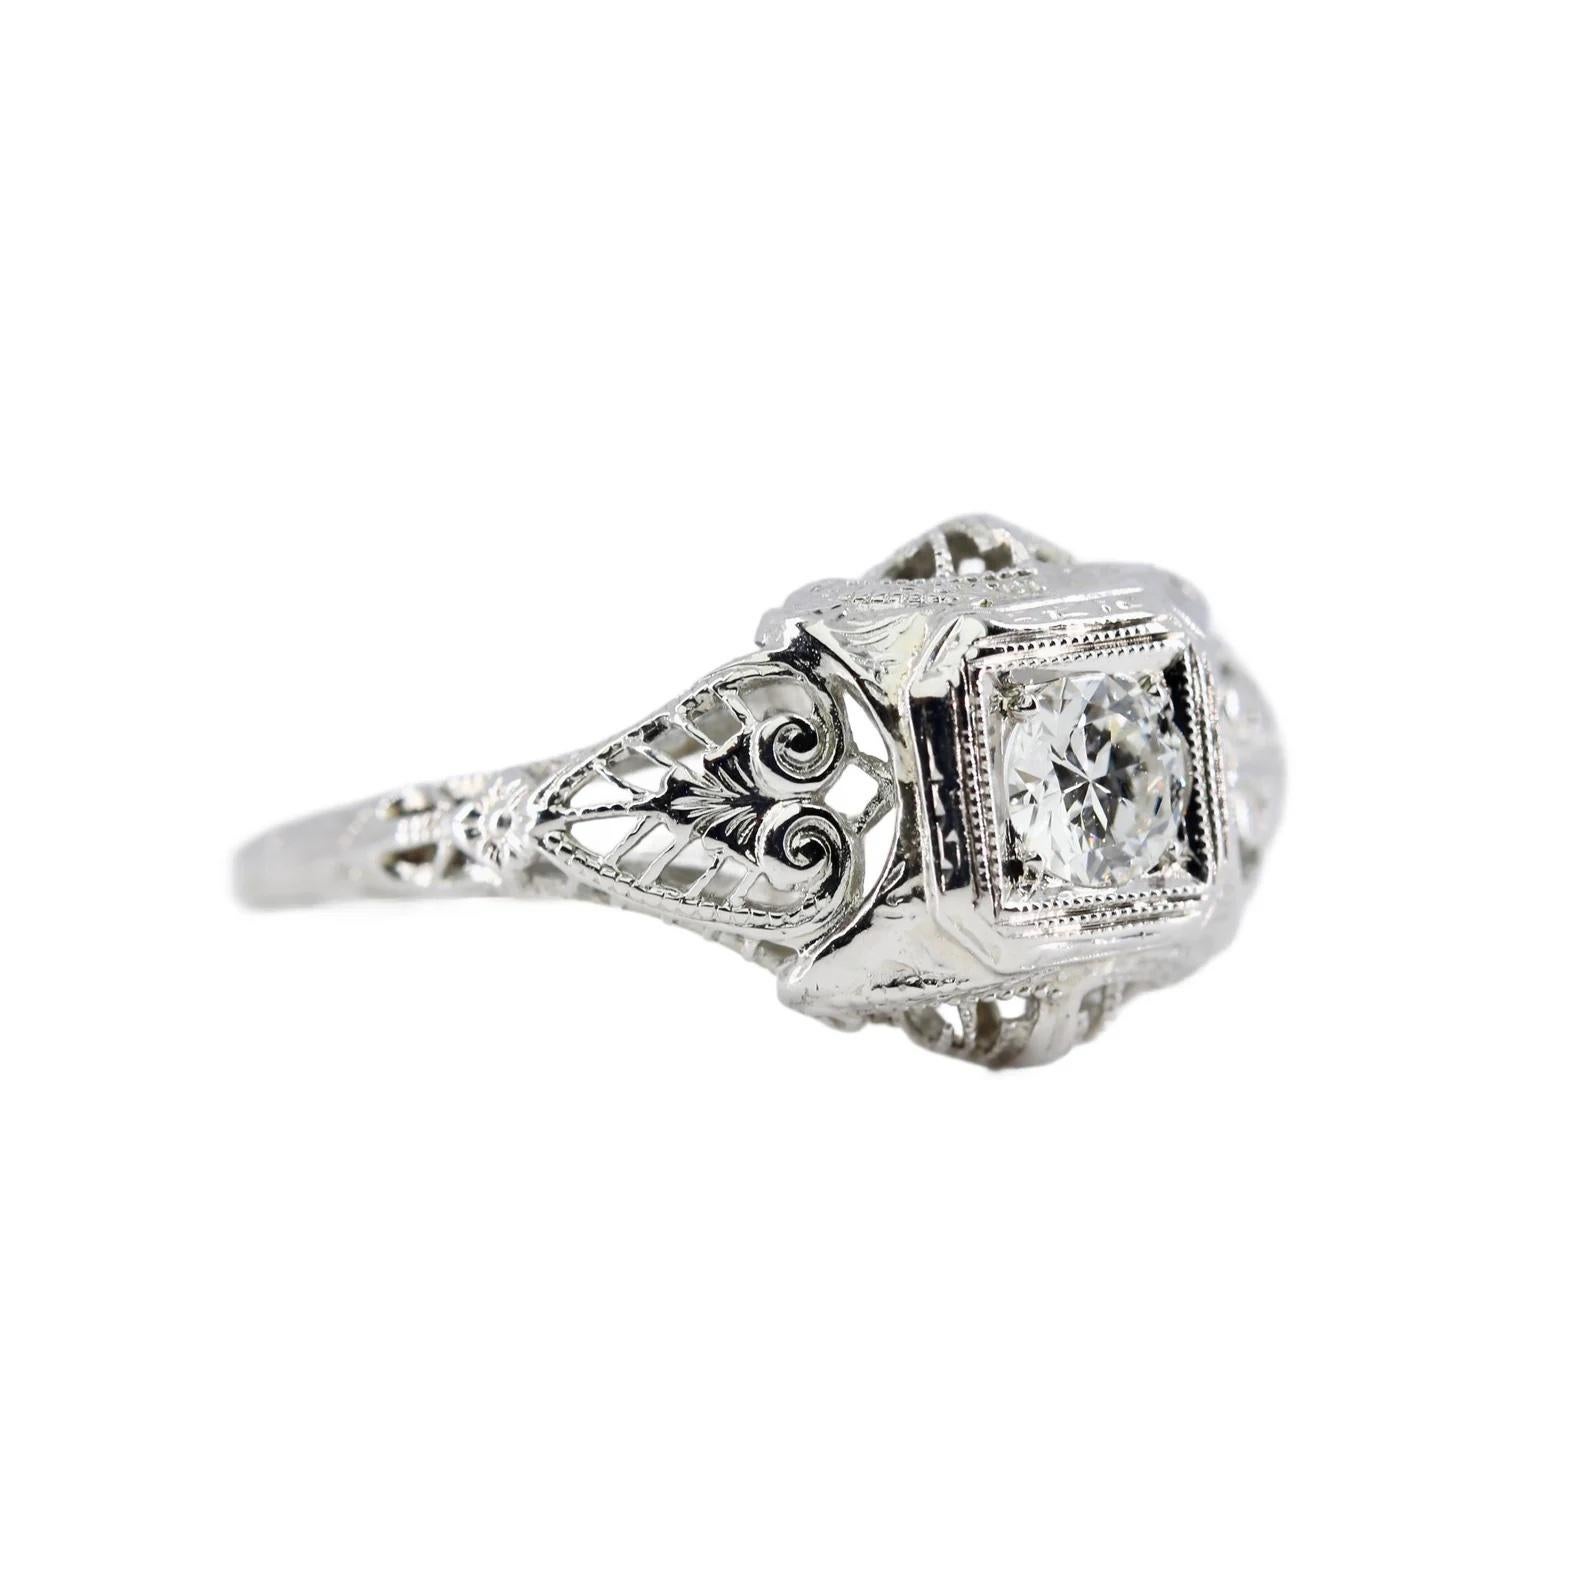 An original Art Deco period diamond filigree engagement ring. Featuring a beautiful floral motif design, this ring is centered by a 0.30 carat European cut diamond. Of G color and VS clarity the sparkling diamond sits framed by miligrain